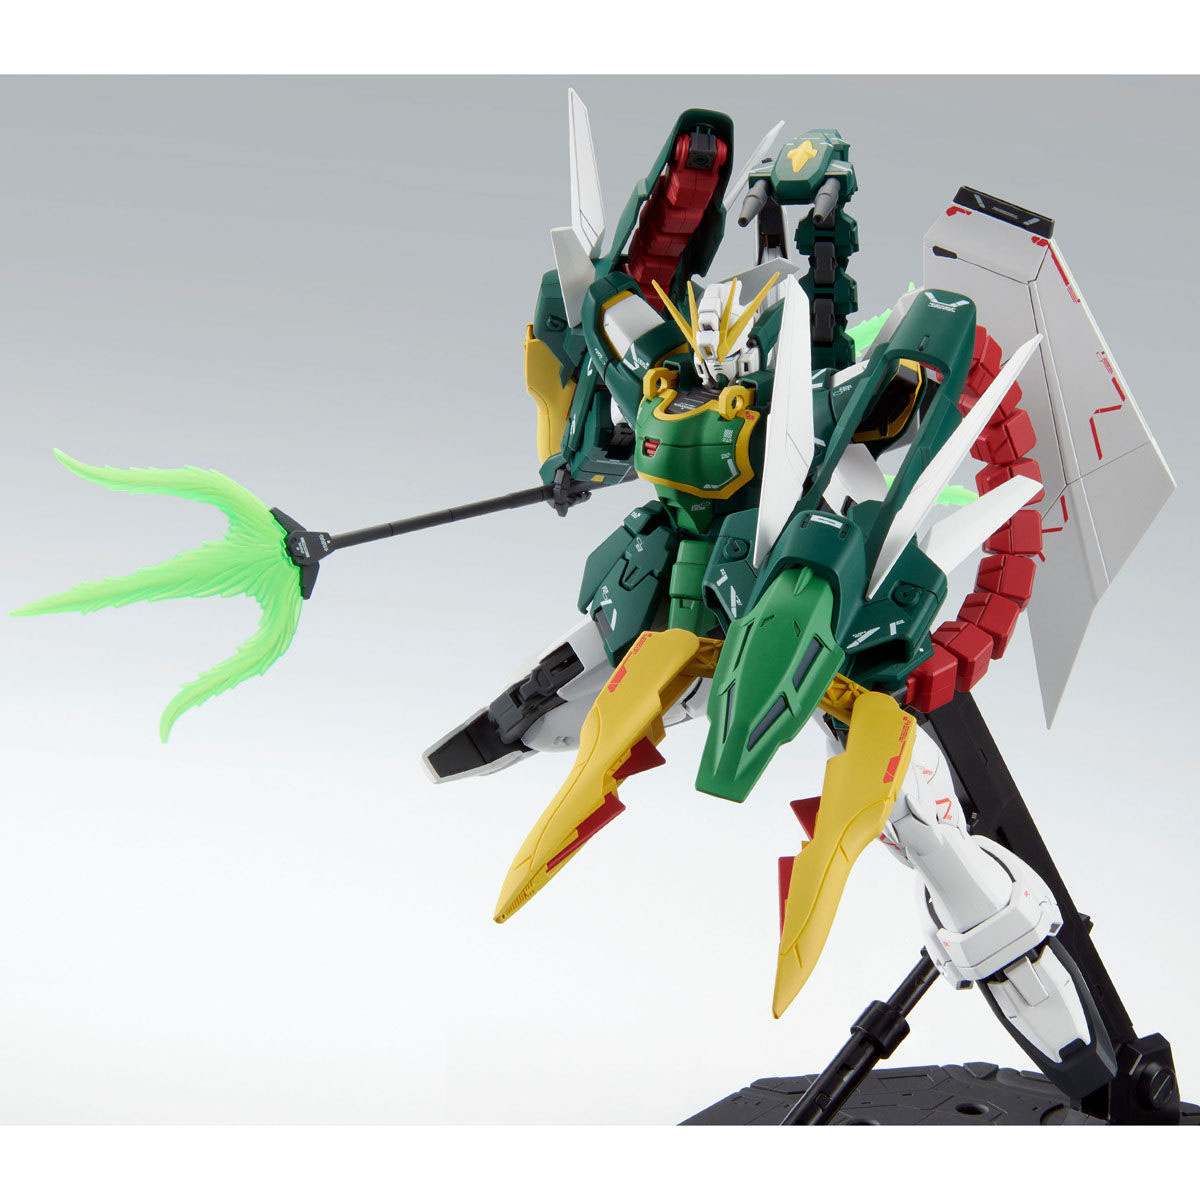 MG 1/100 EXPANSION PARTS SET for MOBILE SUIT GUNDAM W EW SERIES (The Glory of Losers Ver.)